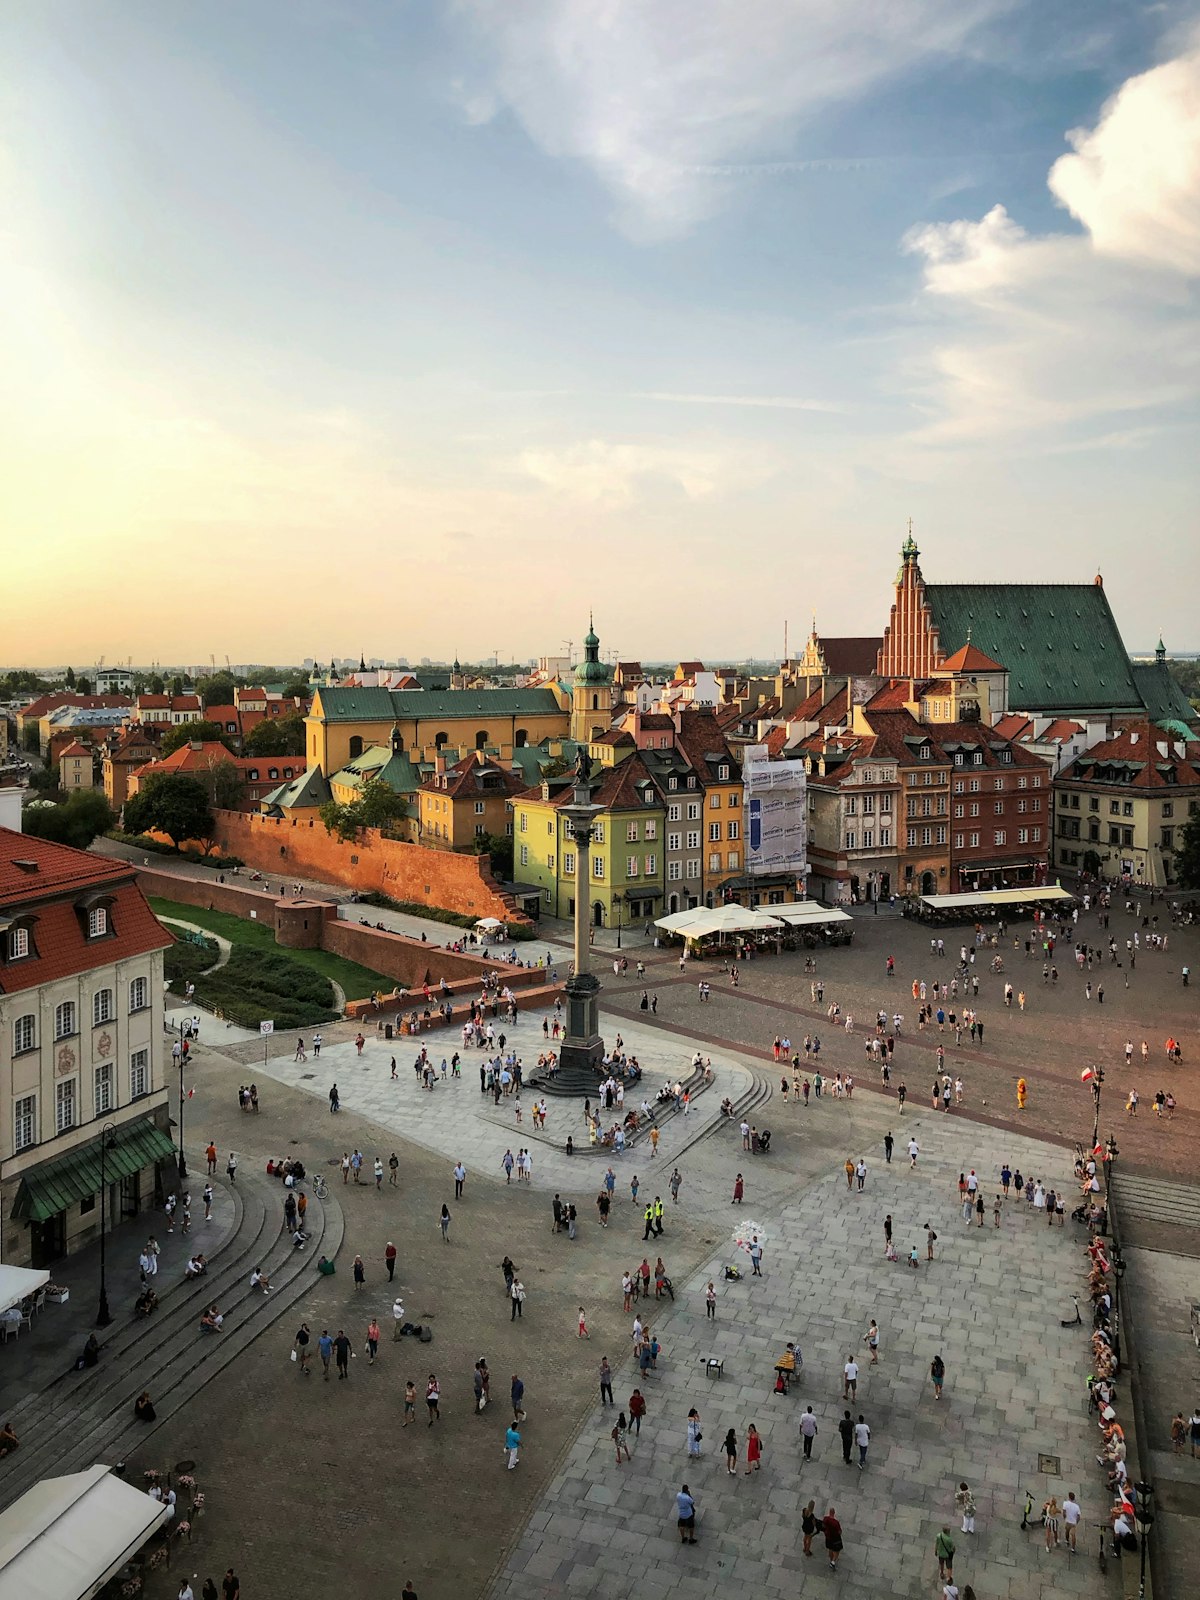 Warsaw Wonders: From Historic Streets to Chopin's Heart